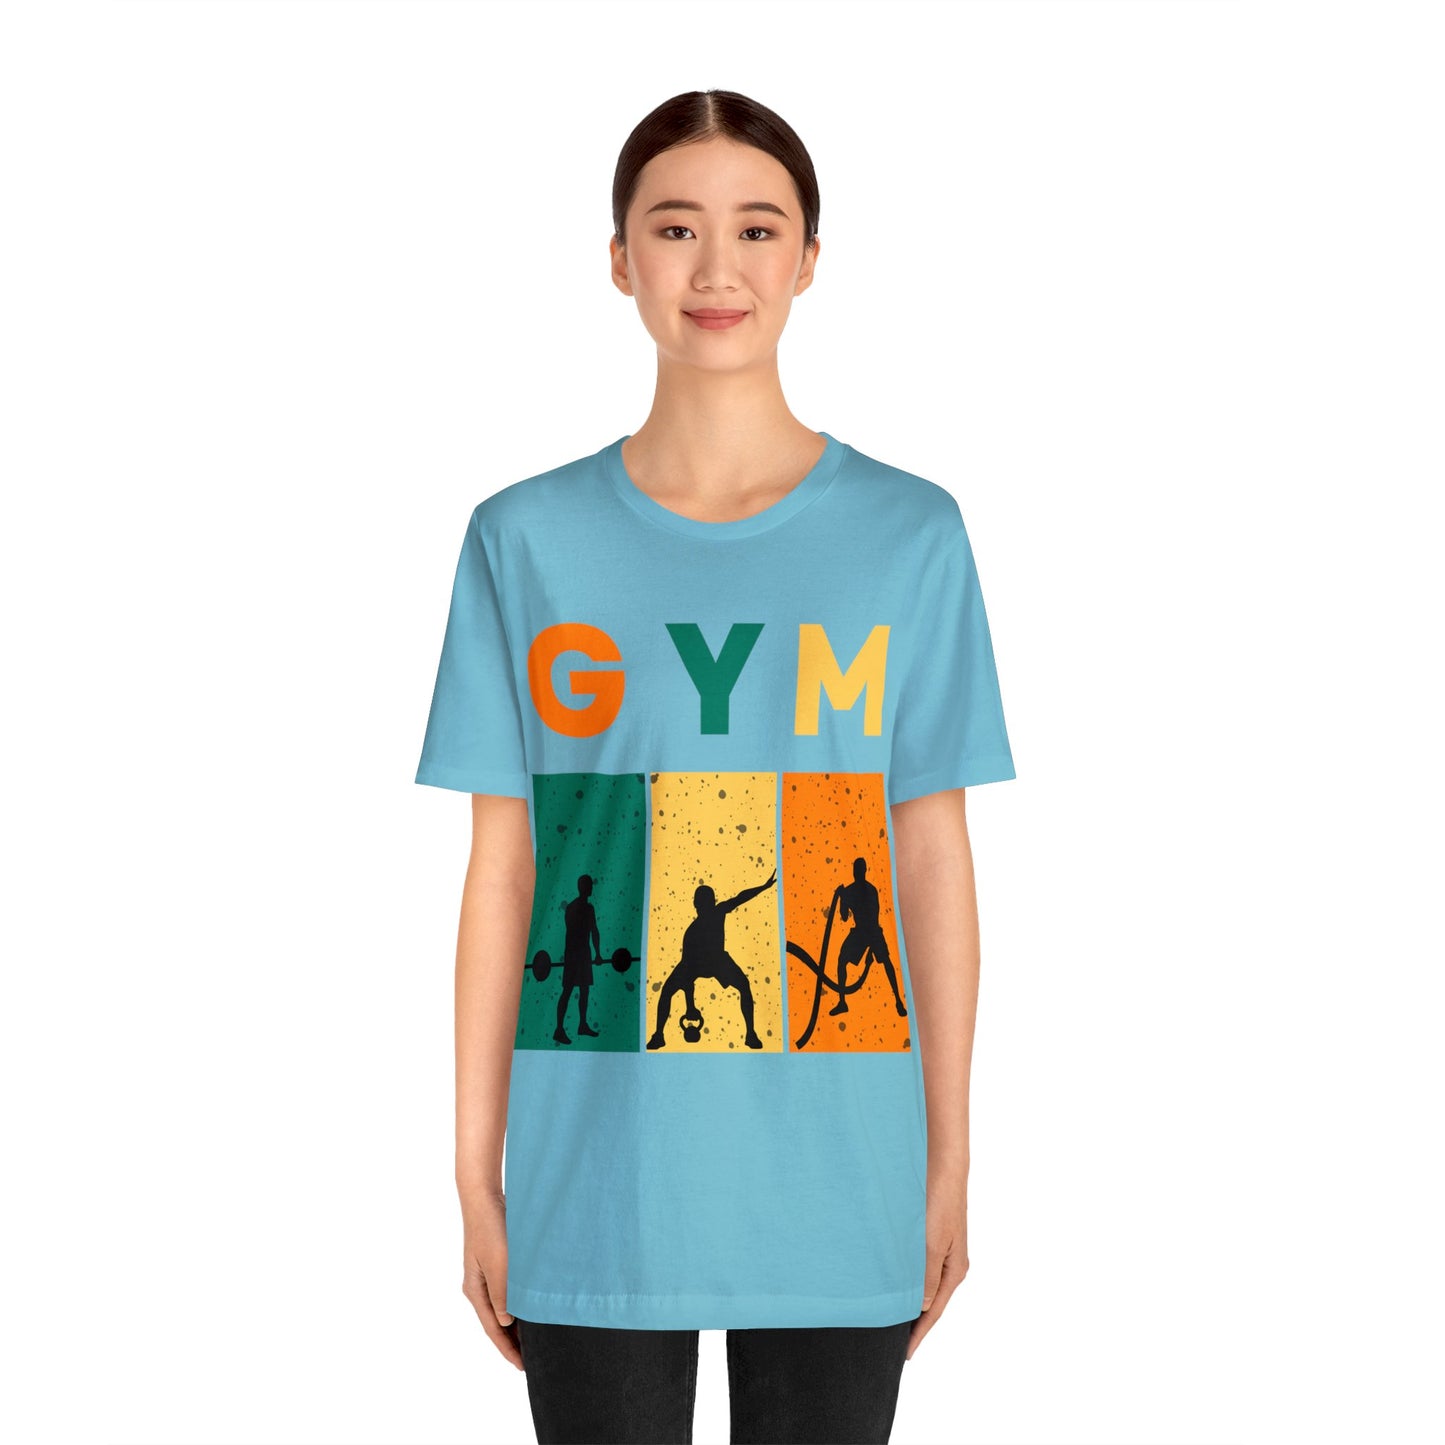 Gym Workout Graphic T Shirt For Men and Women